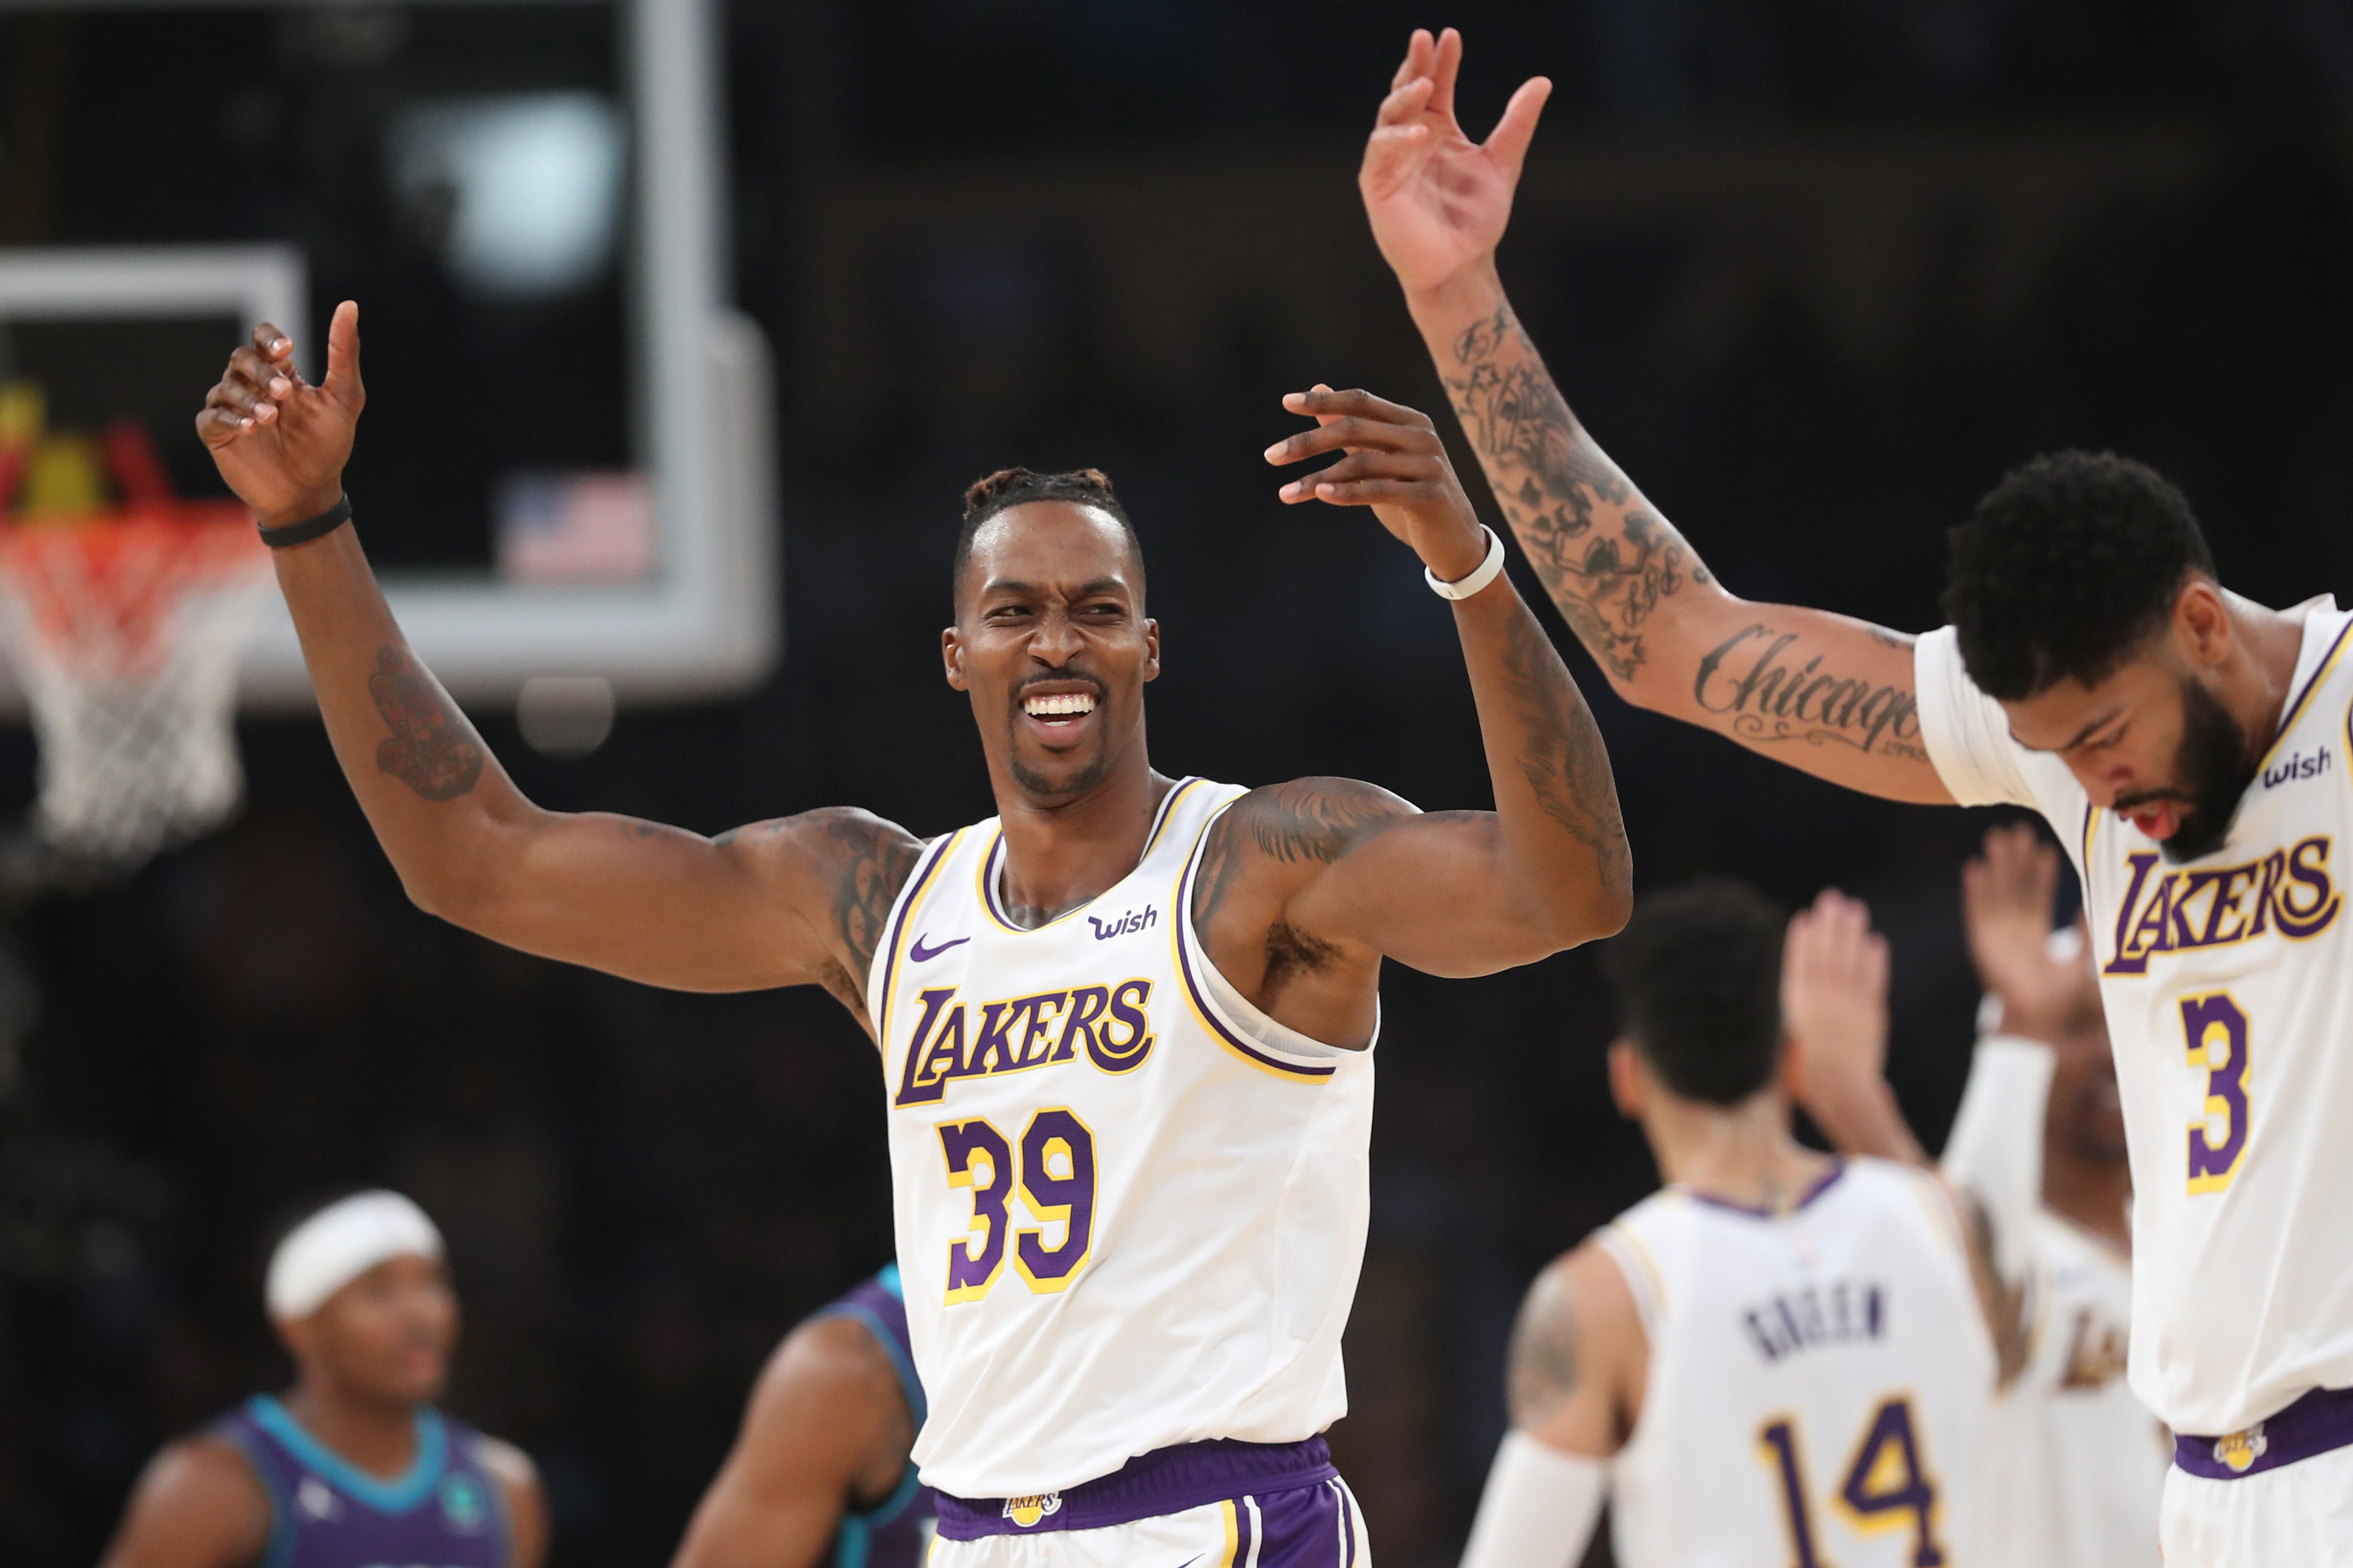 Lakers get a boost early from Dwight Howard, who makes most of